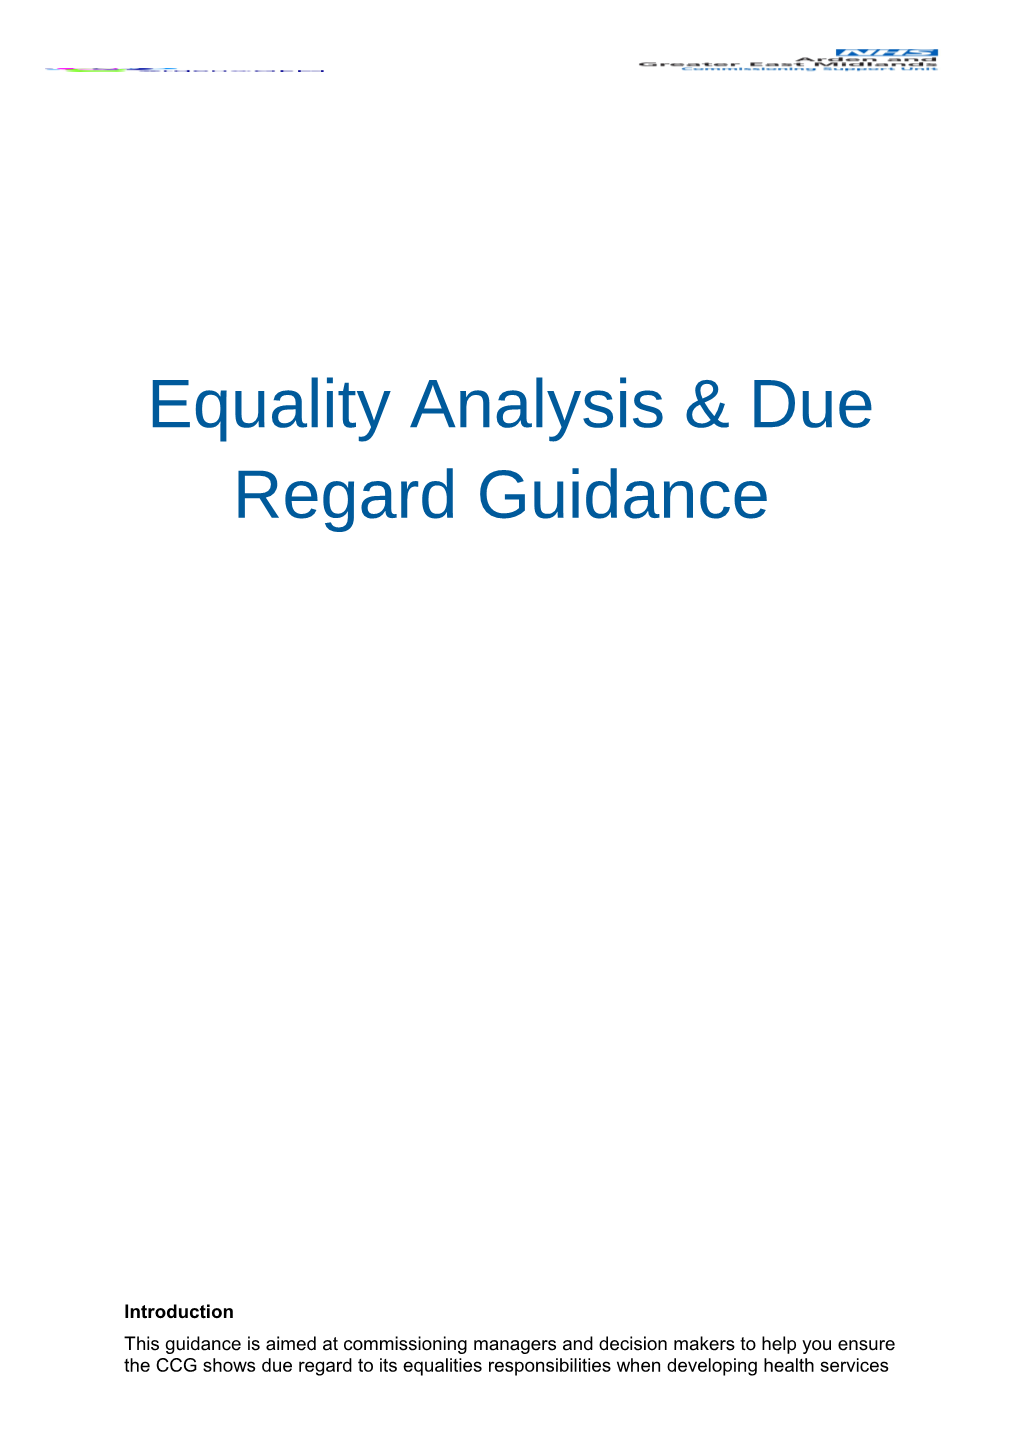 What Is Equality Analysis and Due Regard?